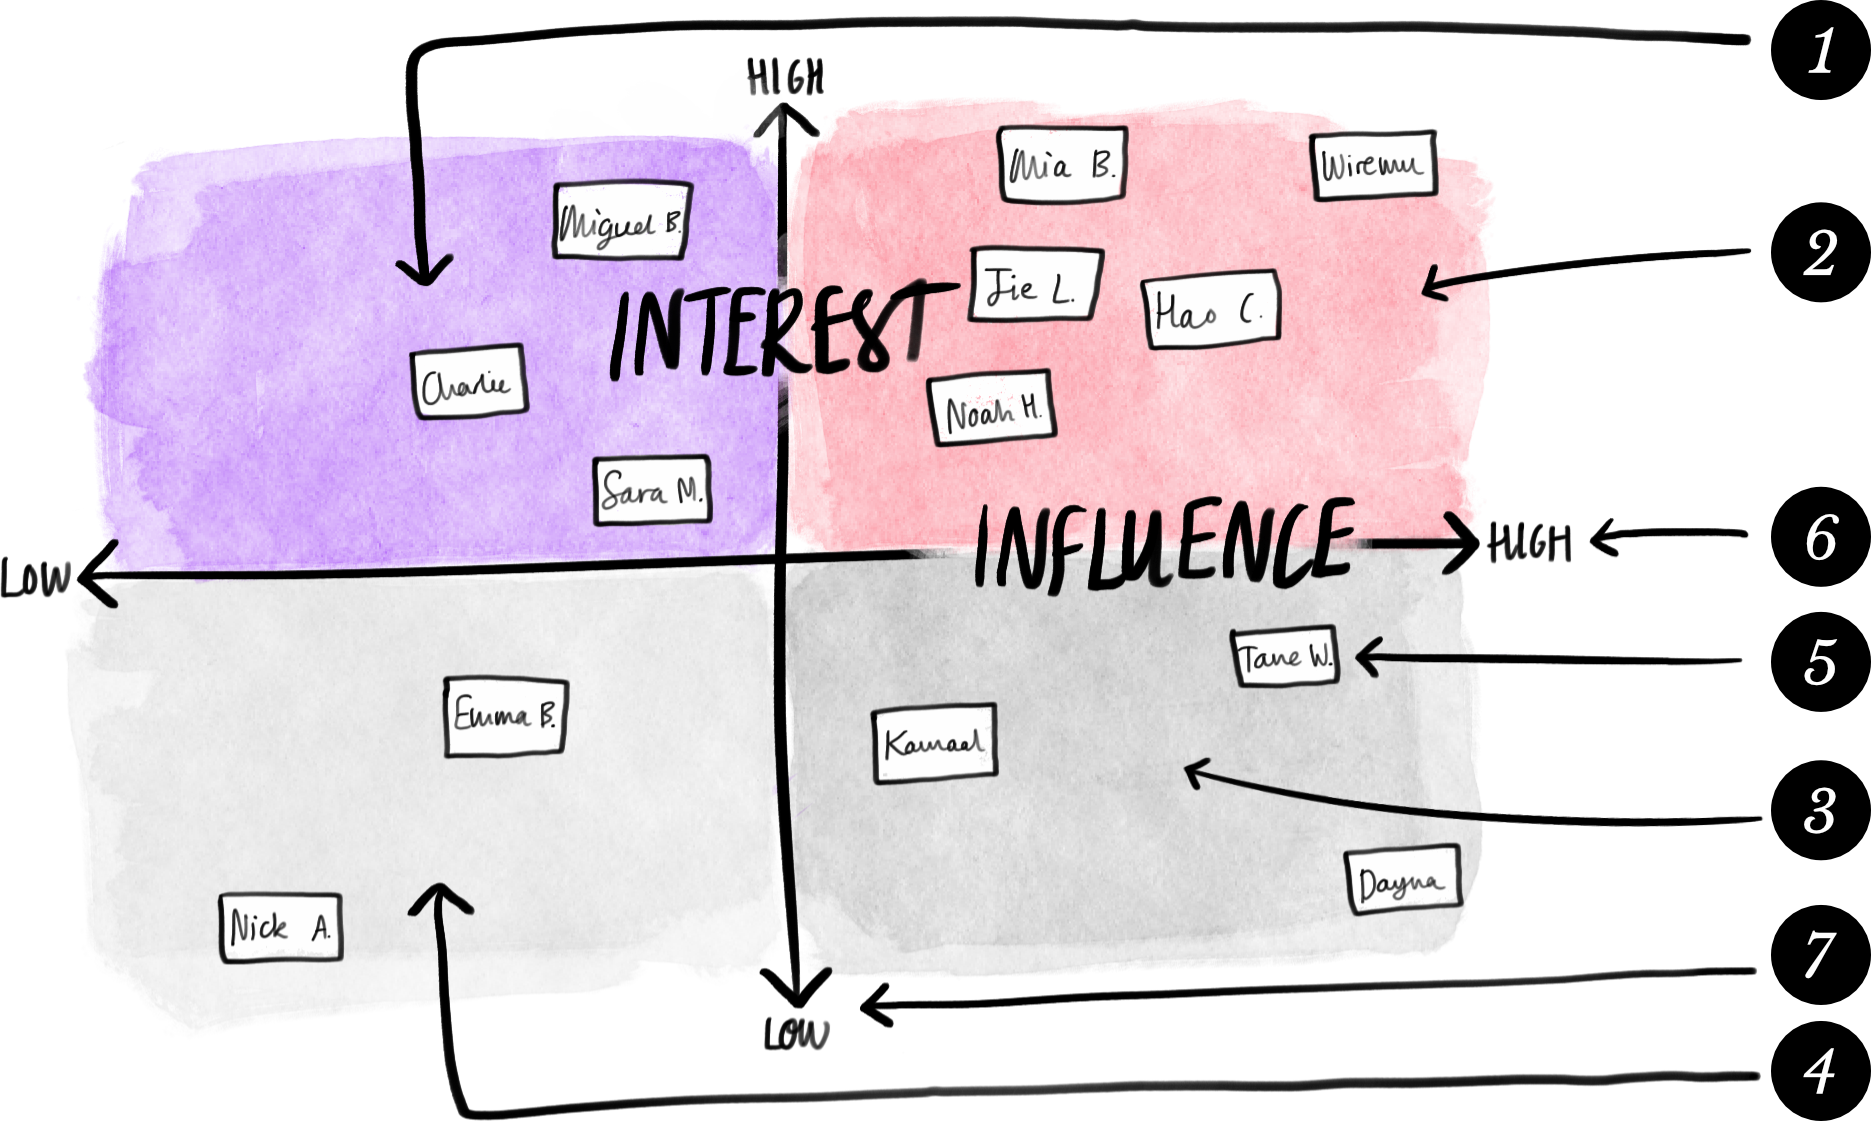 The Stakeholder Map has two axes each from low to high: Influence on the horizontal and Interest on the vertical, which makes four quarters from low interest/low influence to high interest/high influence, with names of individuals inserted appropriately.